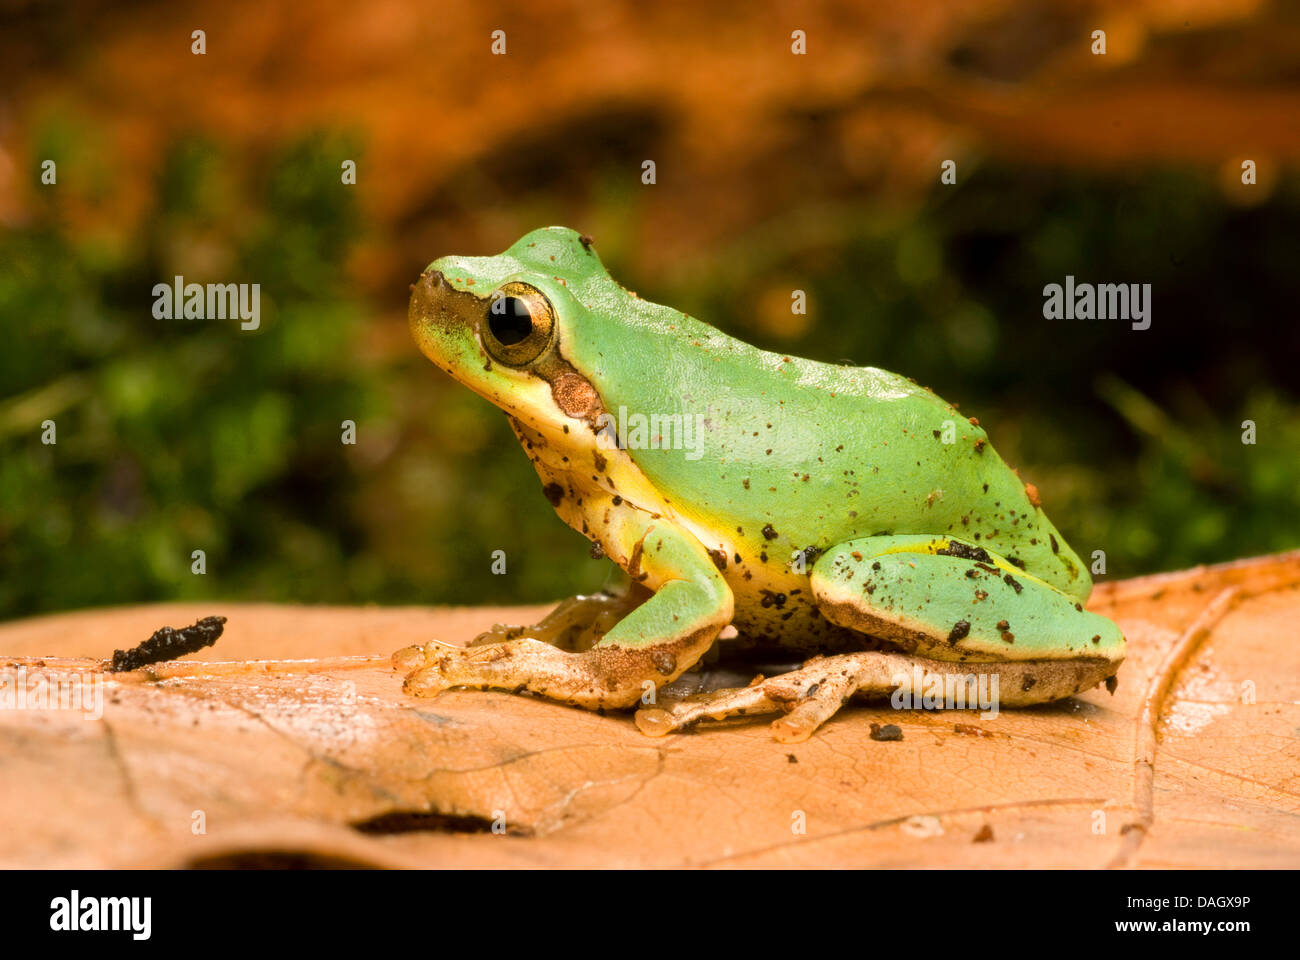 Common Chinese Tree Frog (Hyla chinensis), on brown leaf Stock Photo - Alamy